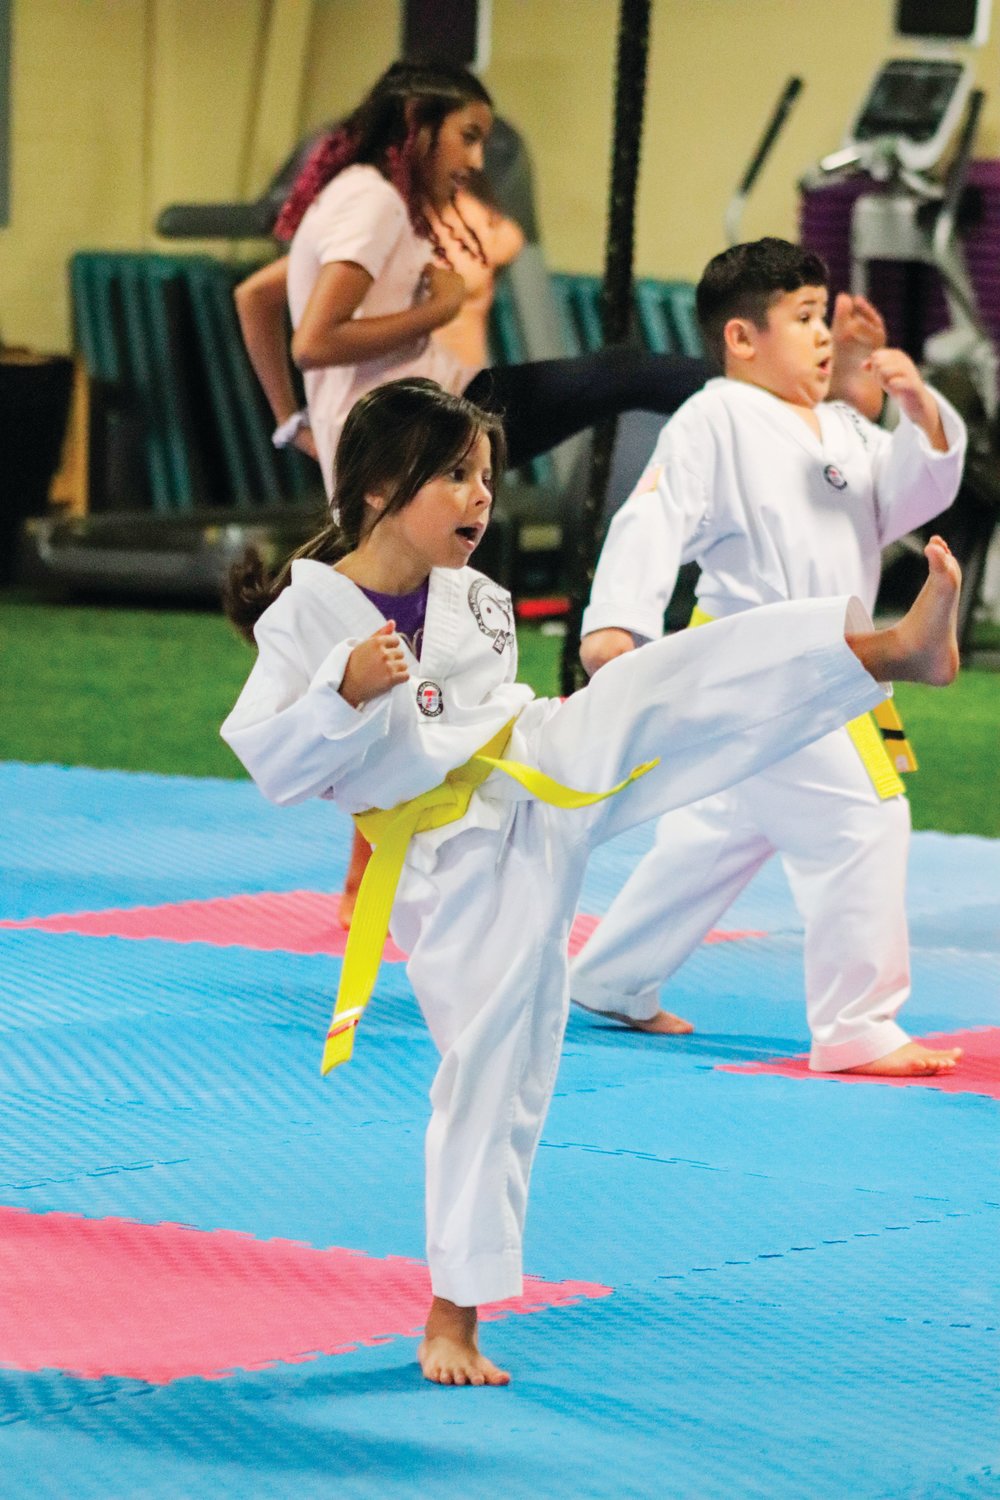 A.F.E. Taekwondo Fitness Academy student Emely Sorto throws a kick during the beginner's class on Monday. Her yellow belt signifies that she's been practicing at the studio for at least 6 months.